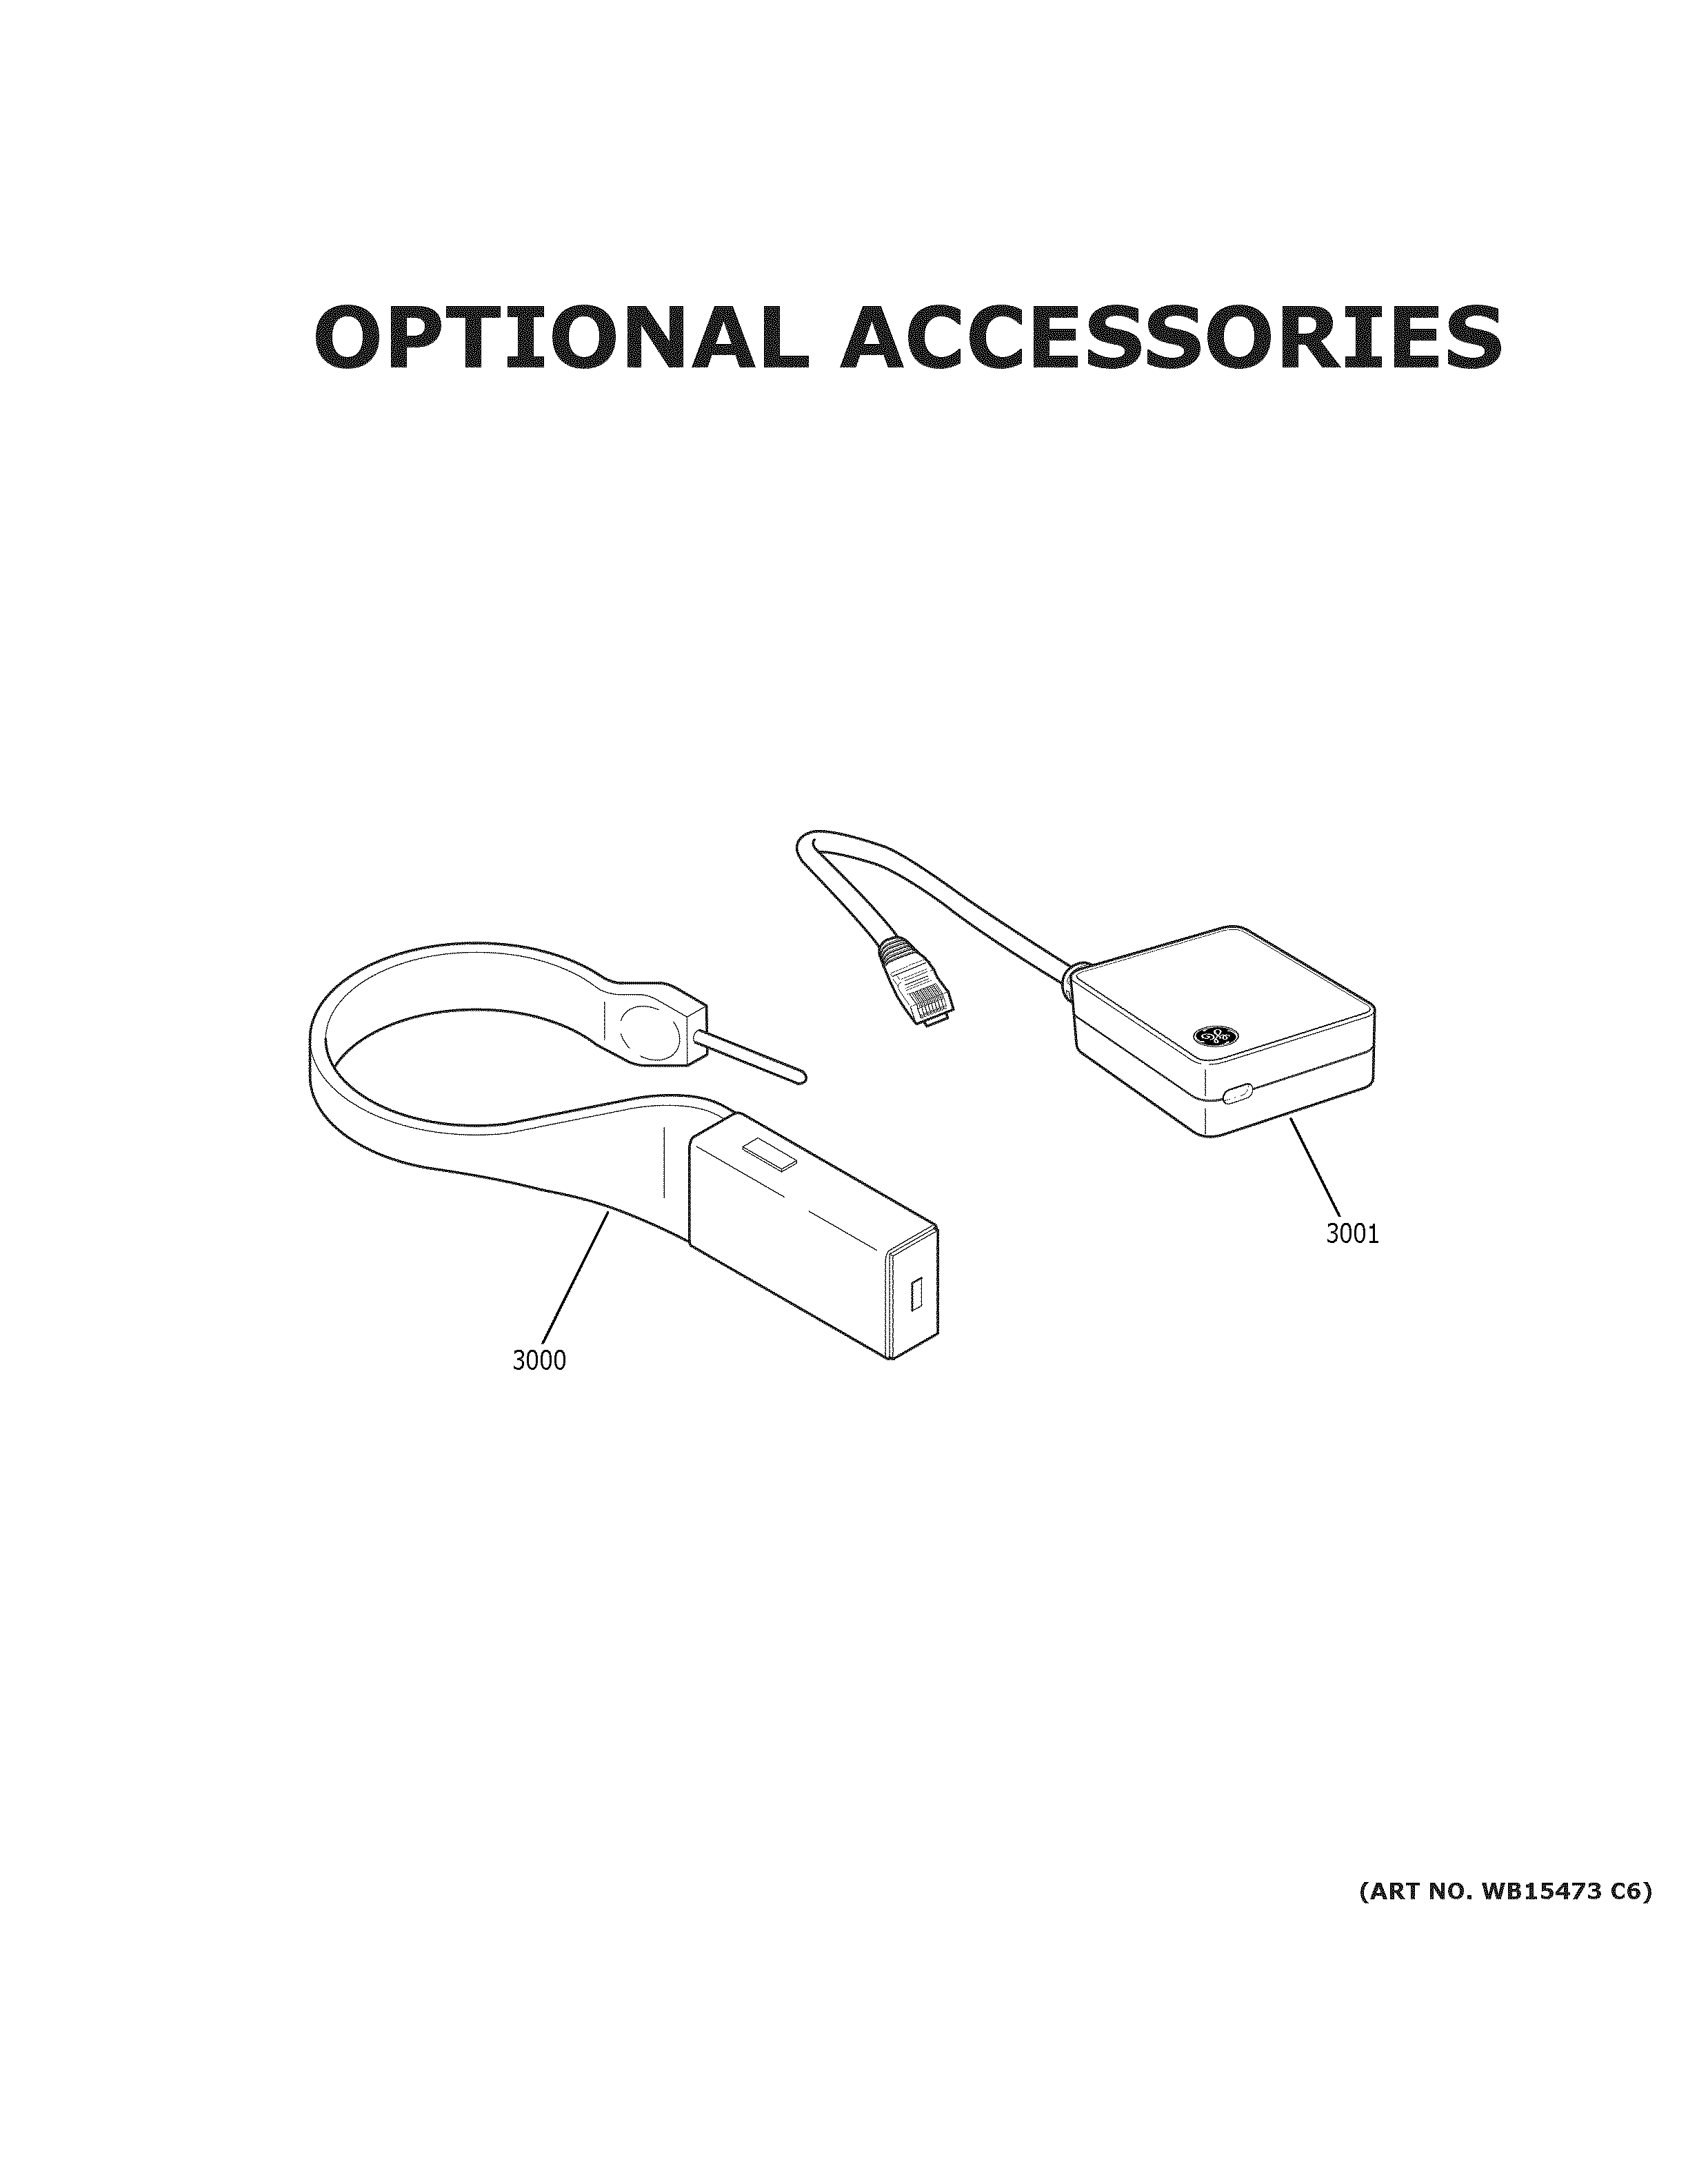 OPTIONAL ACCESSORIES